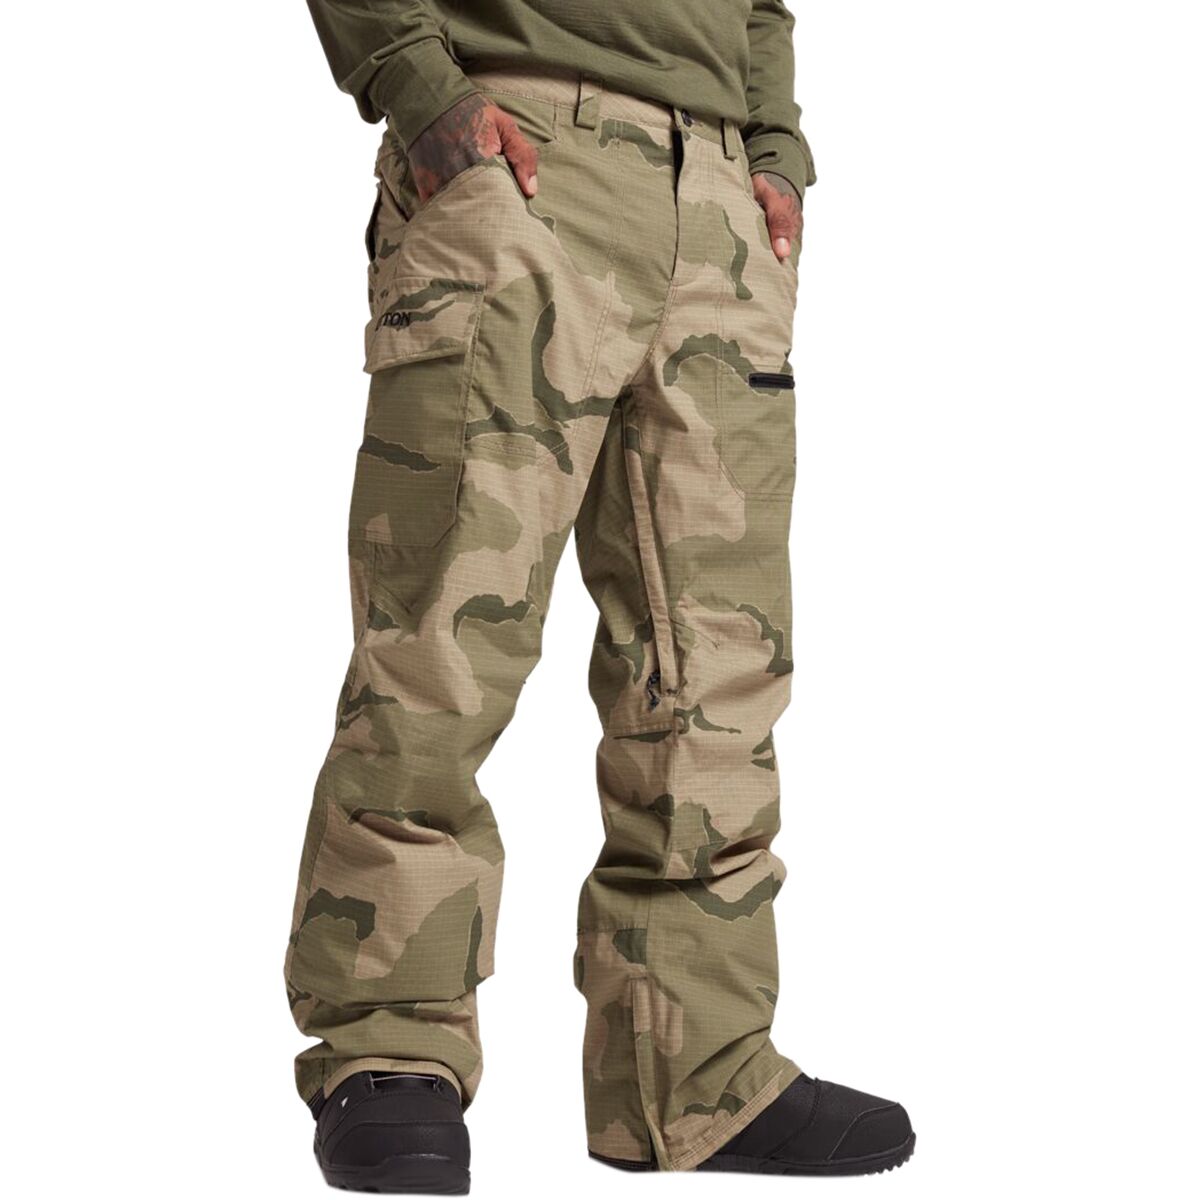 Covert Insulated Pant - Men